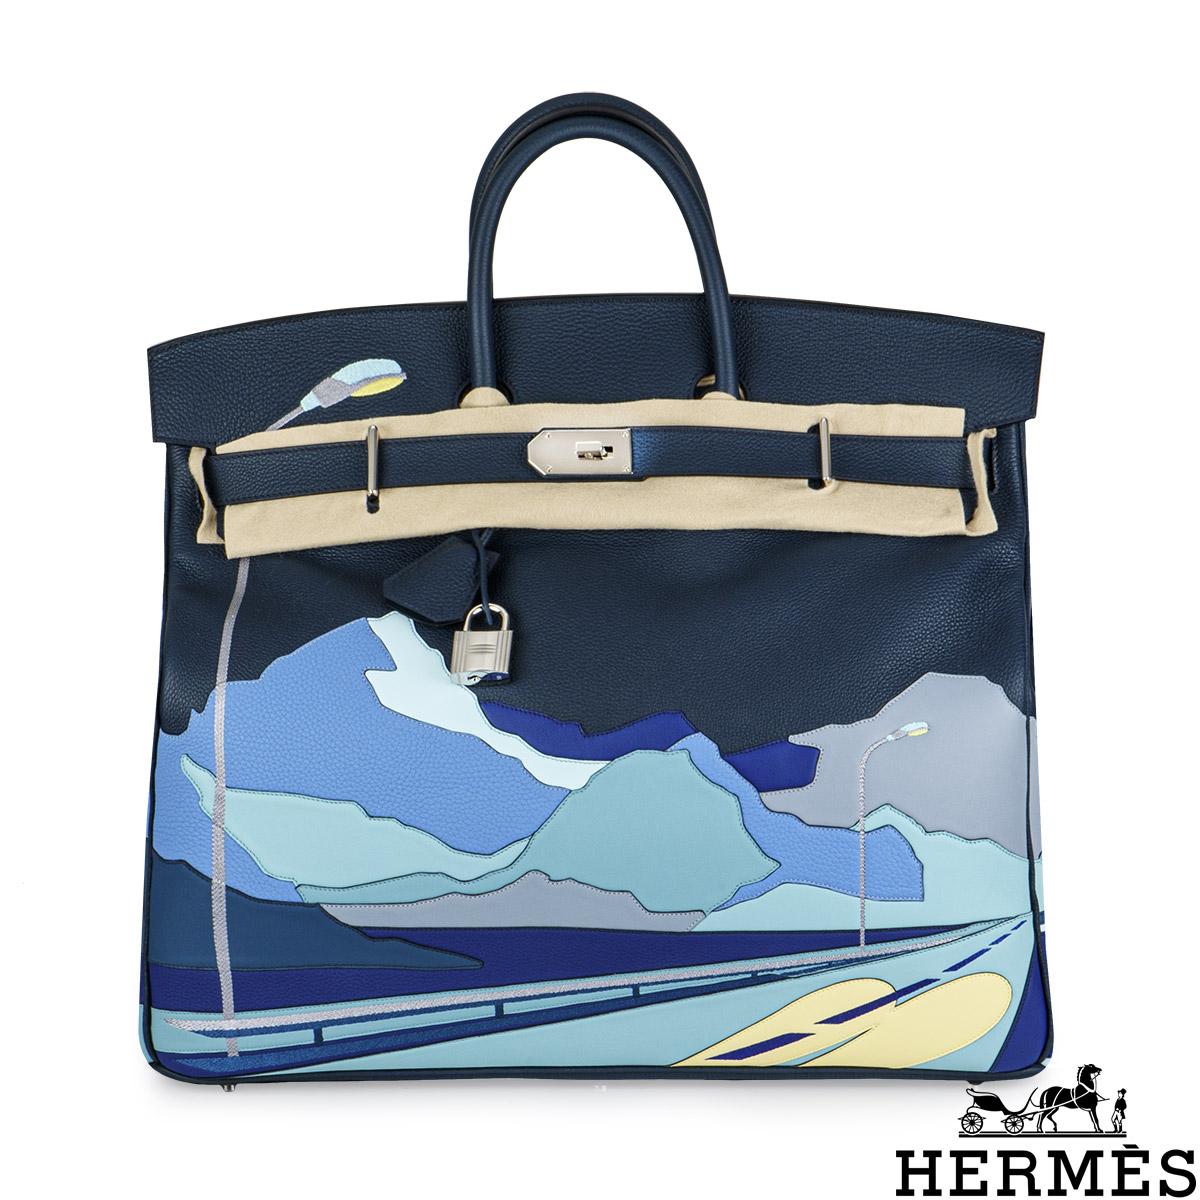 A Limited Edition Hermès Haut A Courries Birkin 50cm handbag. The exterior of this HAC Birkin displays a design of an Endless Road winding through a Californian landscape. It features Togo, Swift and Clemence leather in Bleu de Prusse, complemented